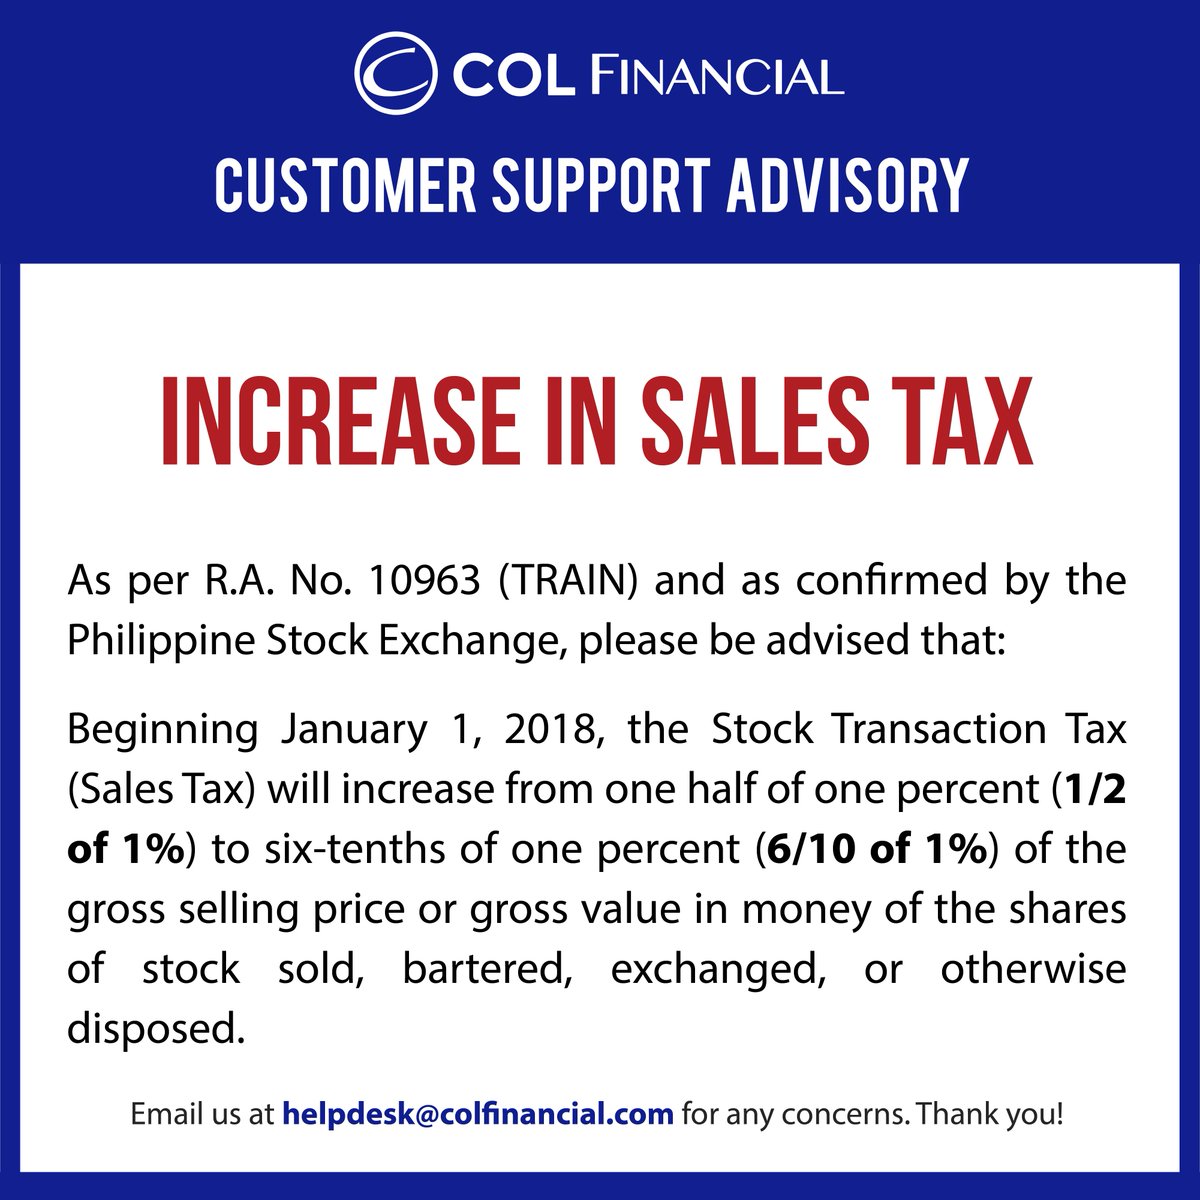 Col Financial On Twitter Advisory Increase In Sales Tax For